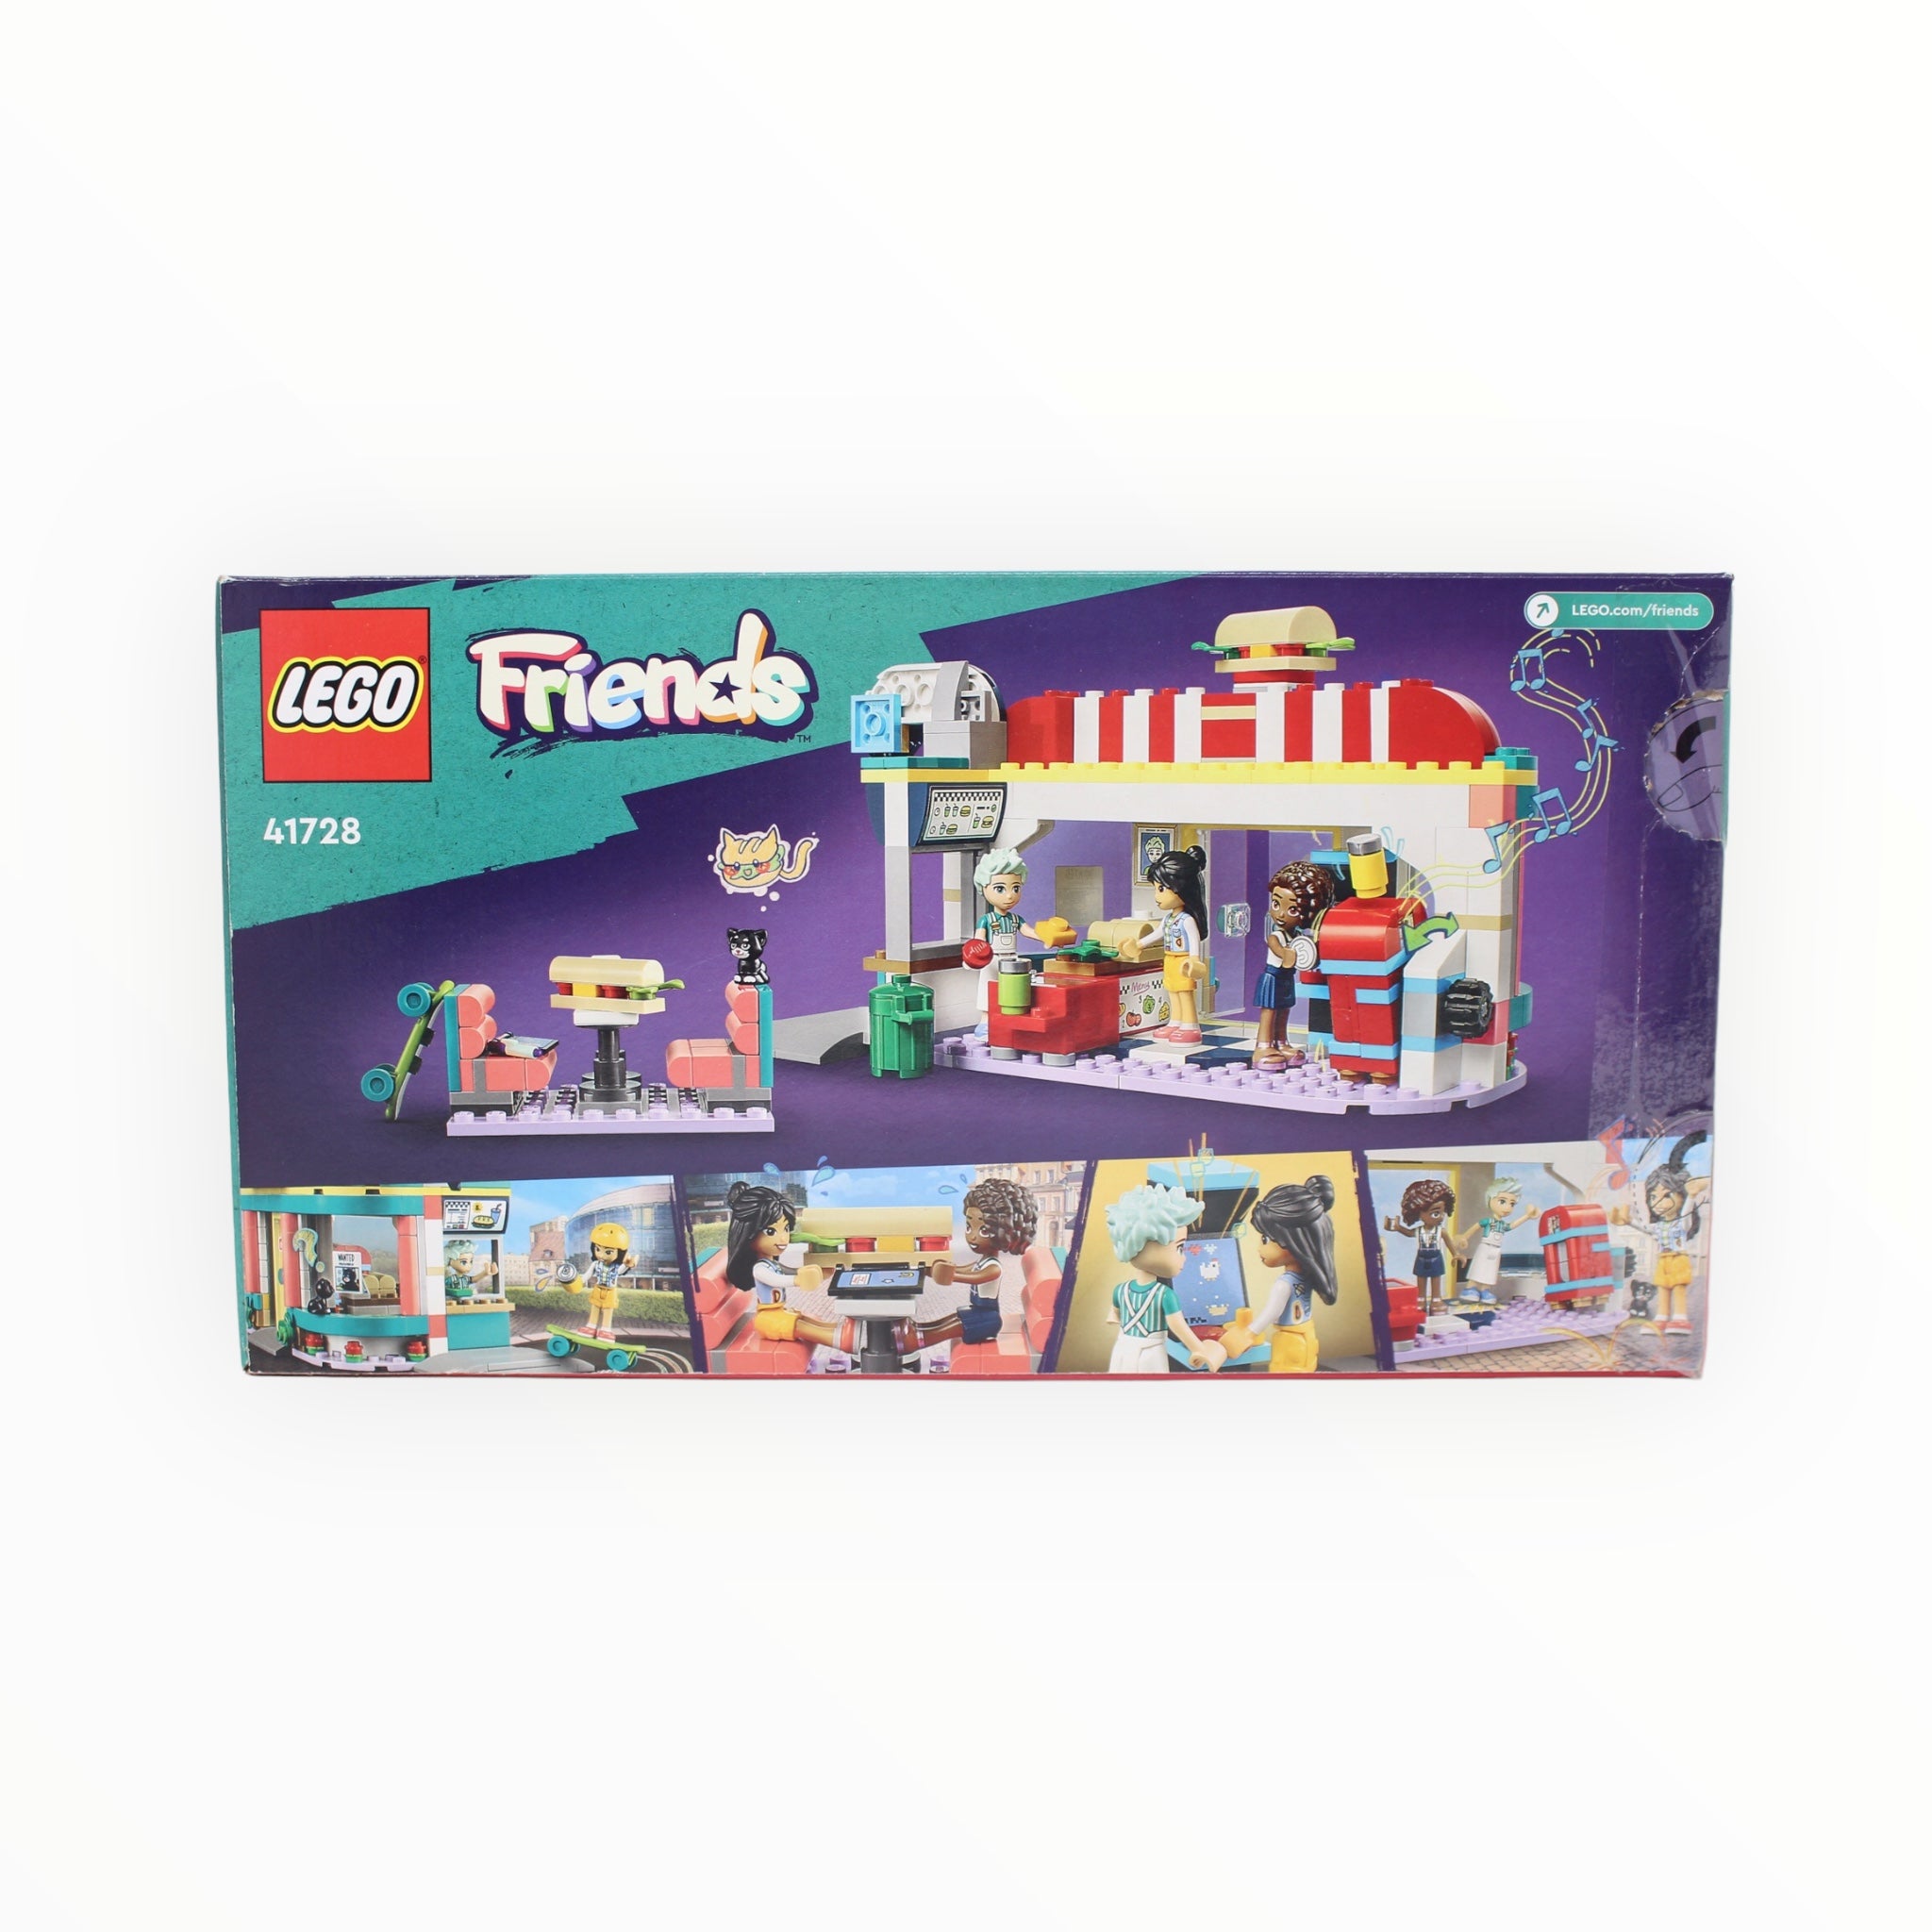 Certified Used Set 41728 Friends Heartlake Downtown Diner (some bags sealed)